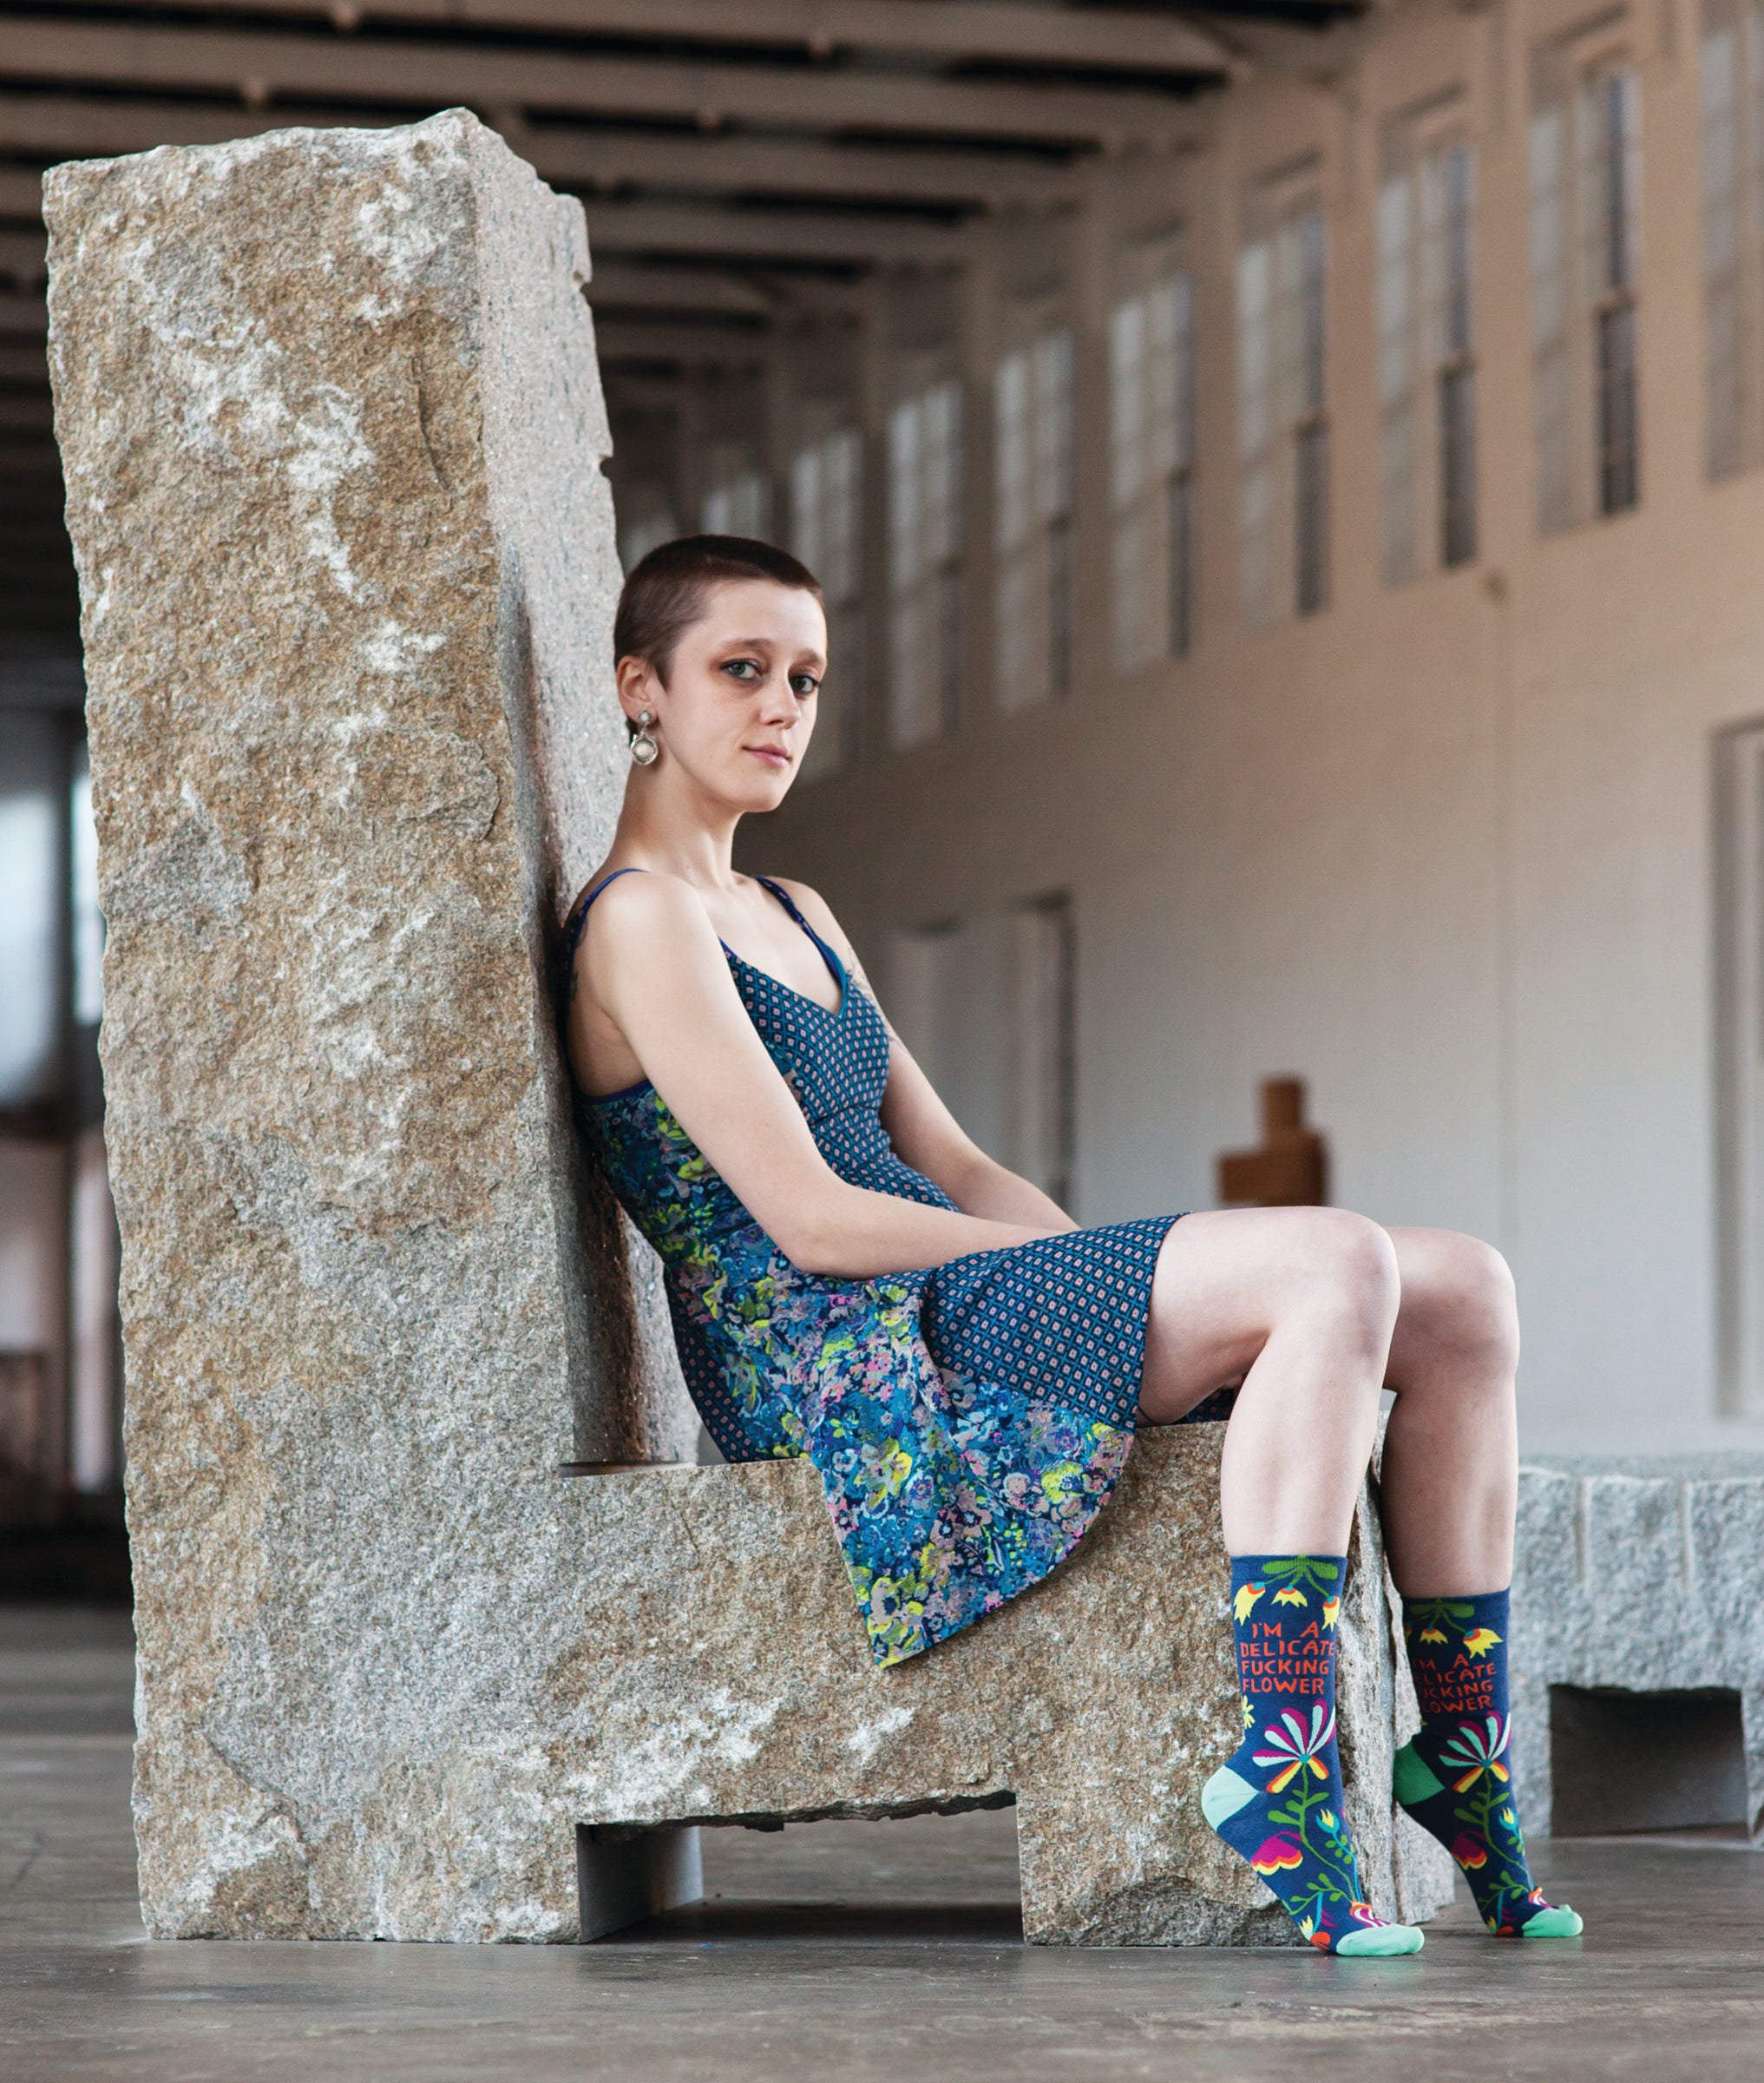 A short haired model in a blue floral dress sits on a cement chair while wearing the 